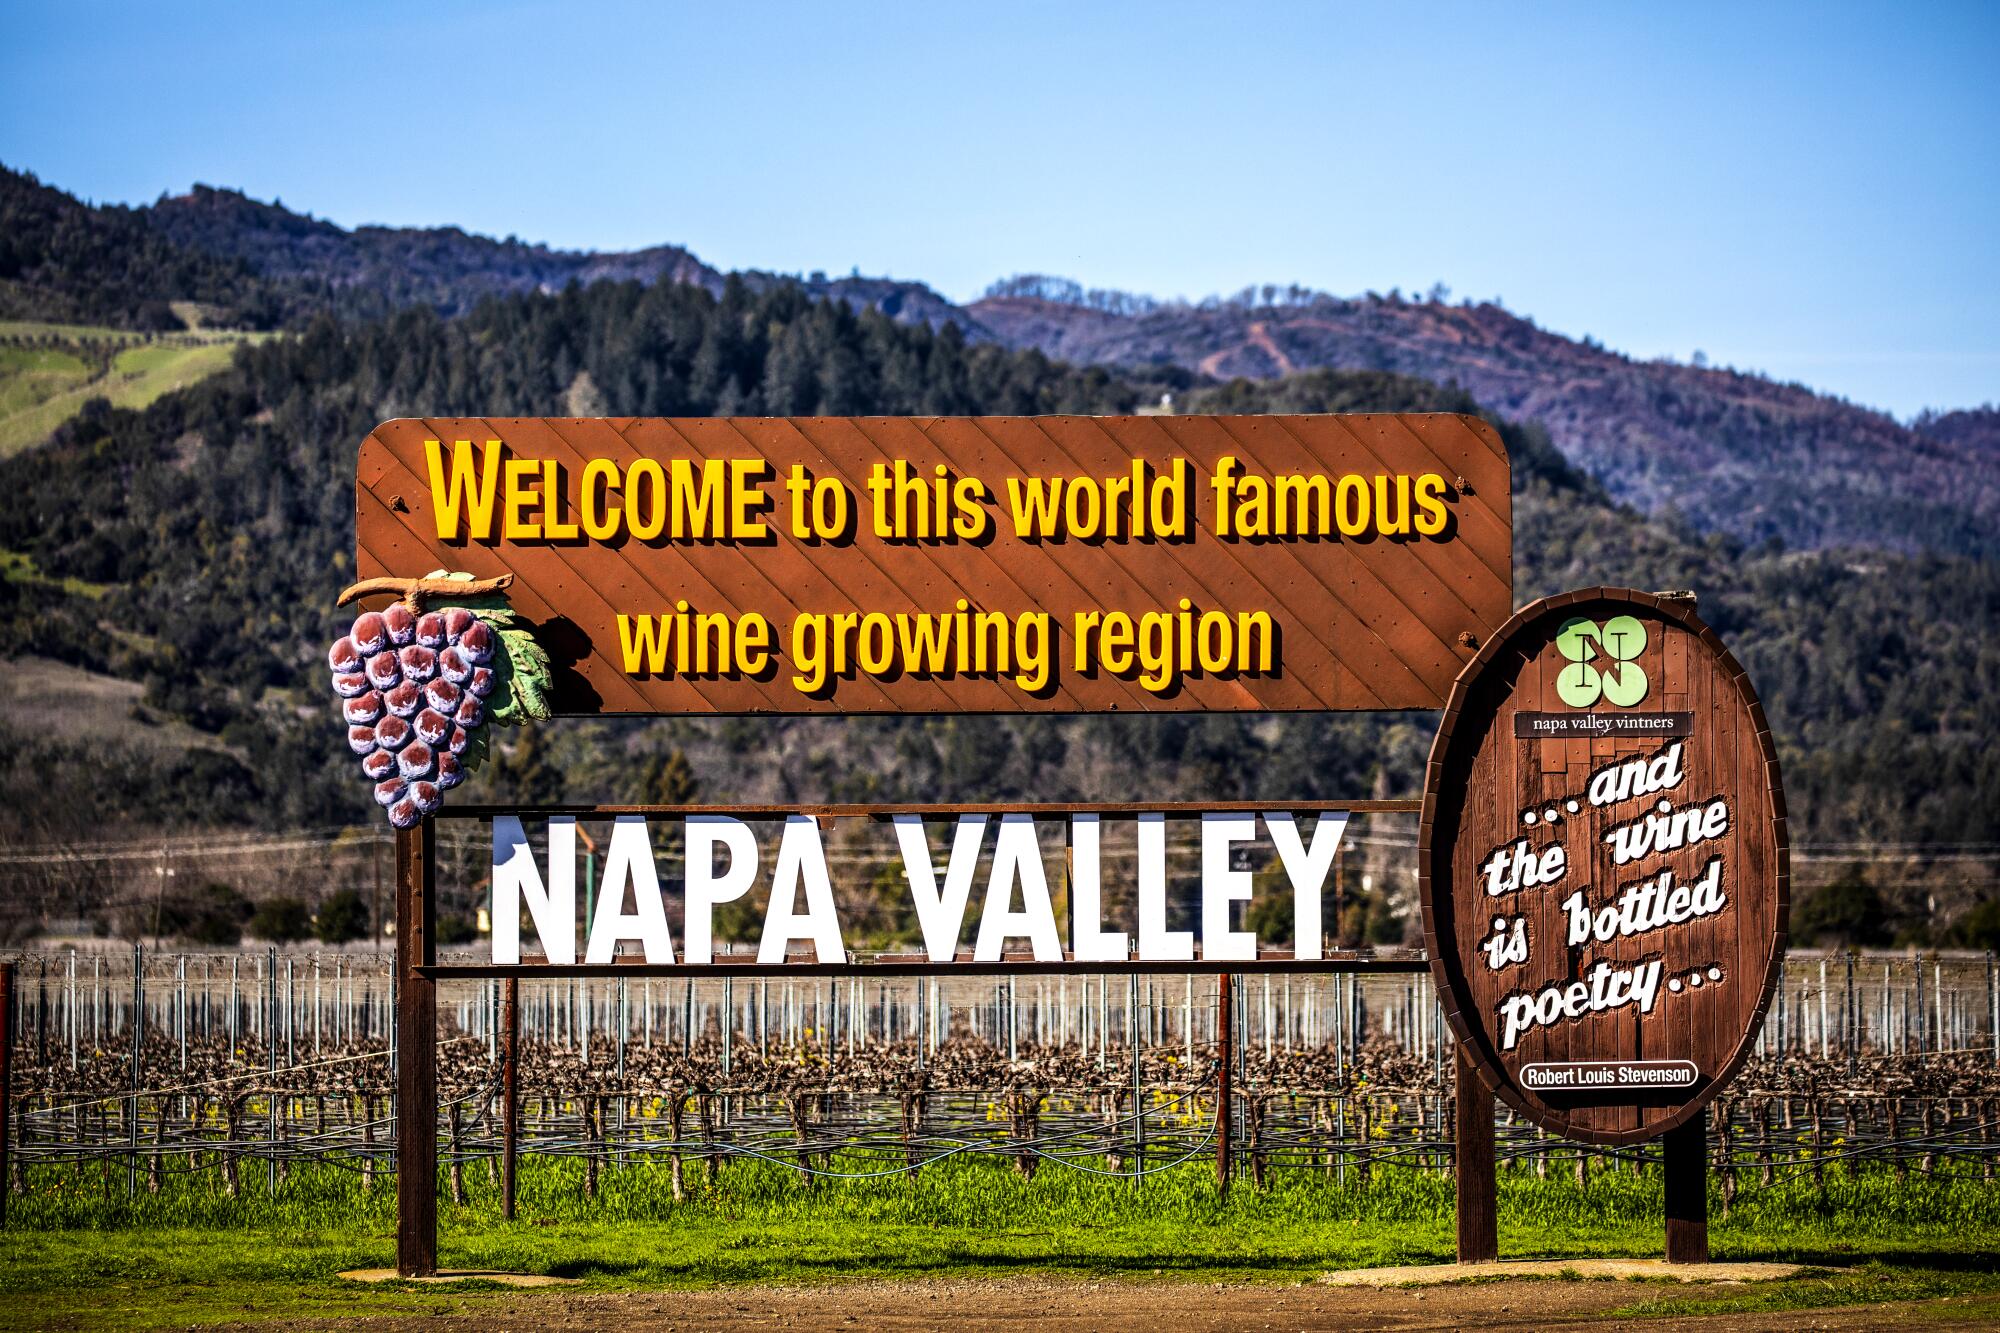 A sign reads "Welcome to this world famous wine growing region - Napa Valley."